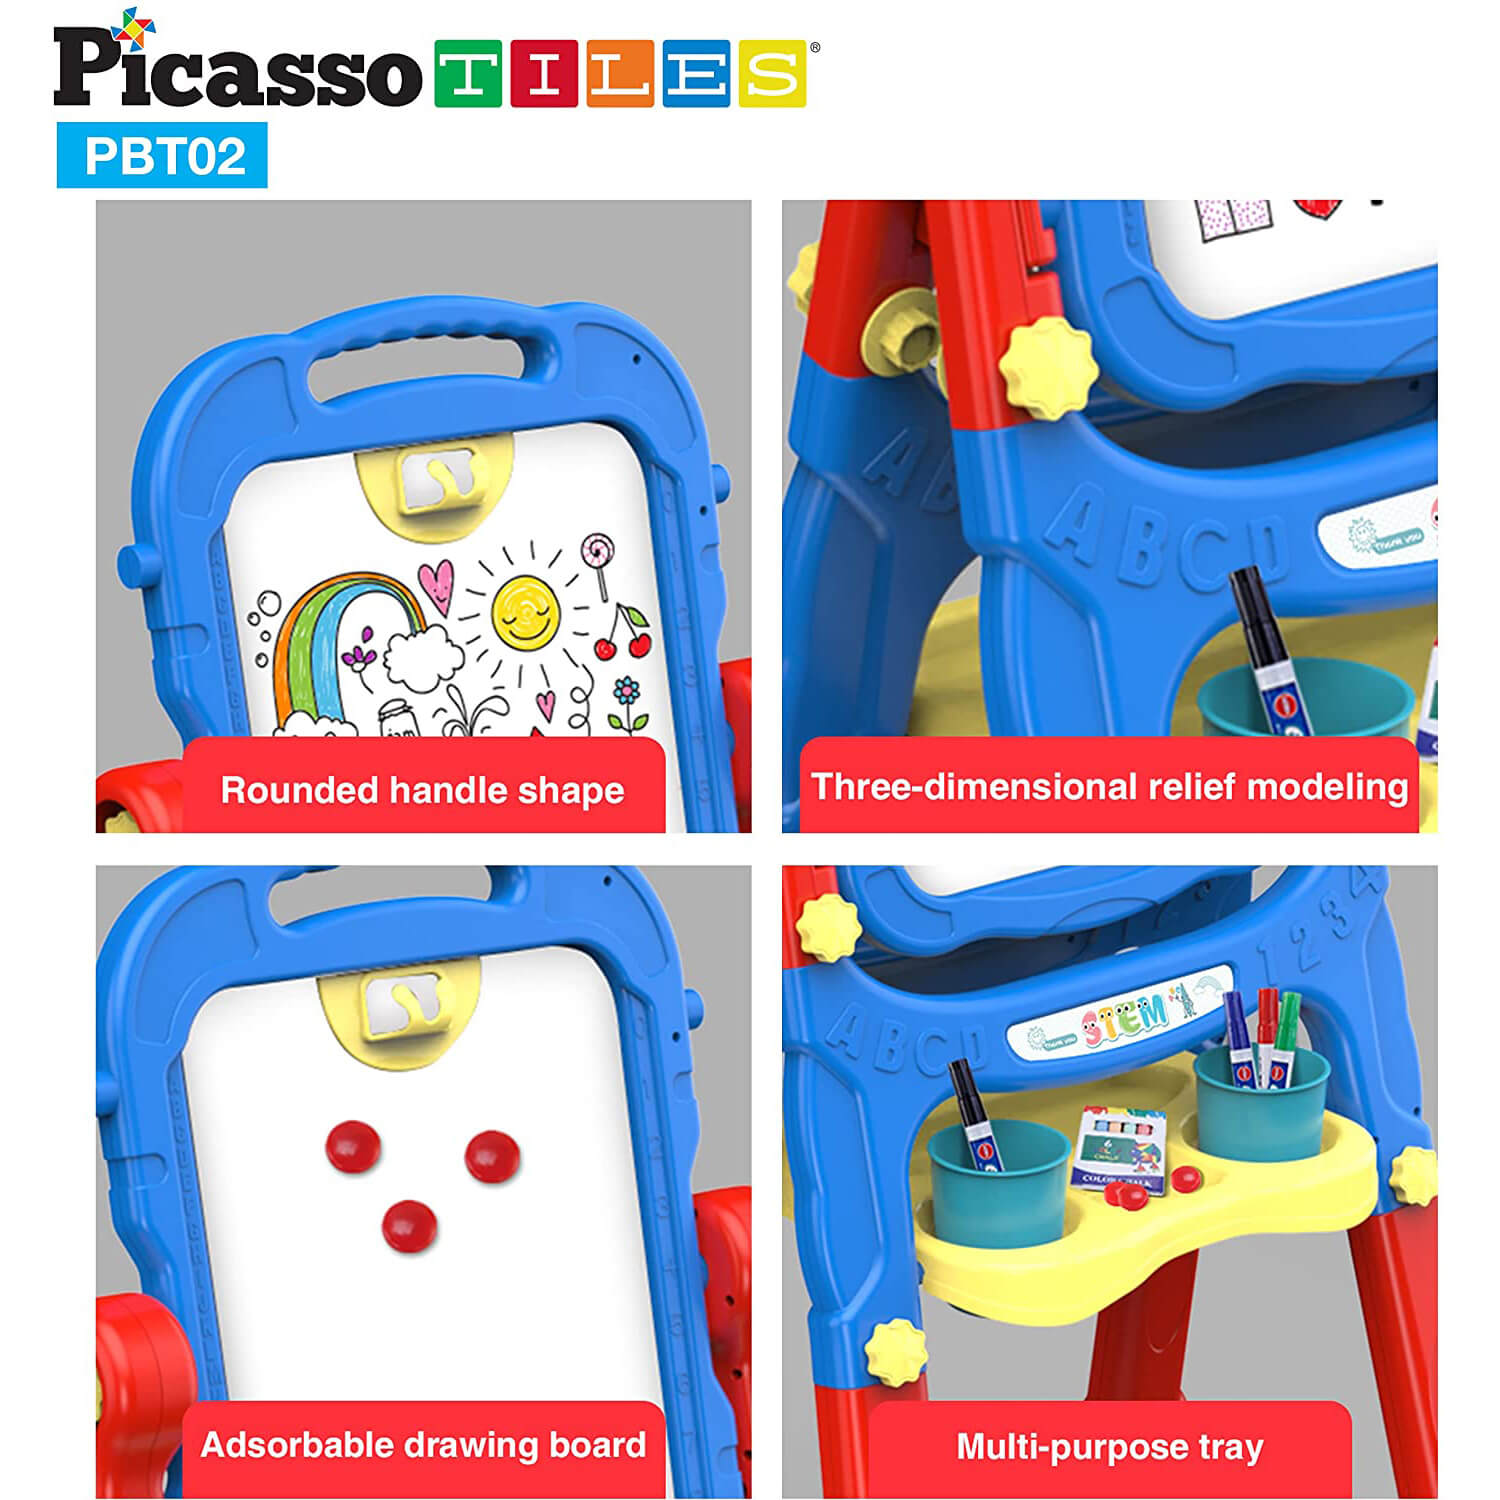 PicassoTiles All-In-One Art Easel